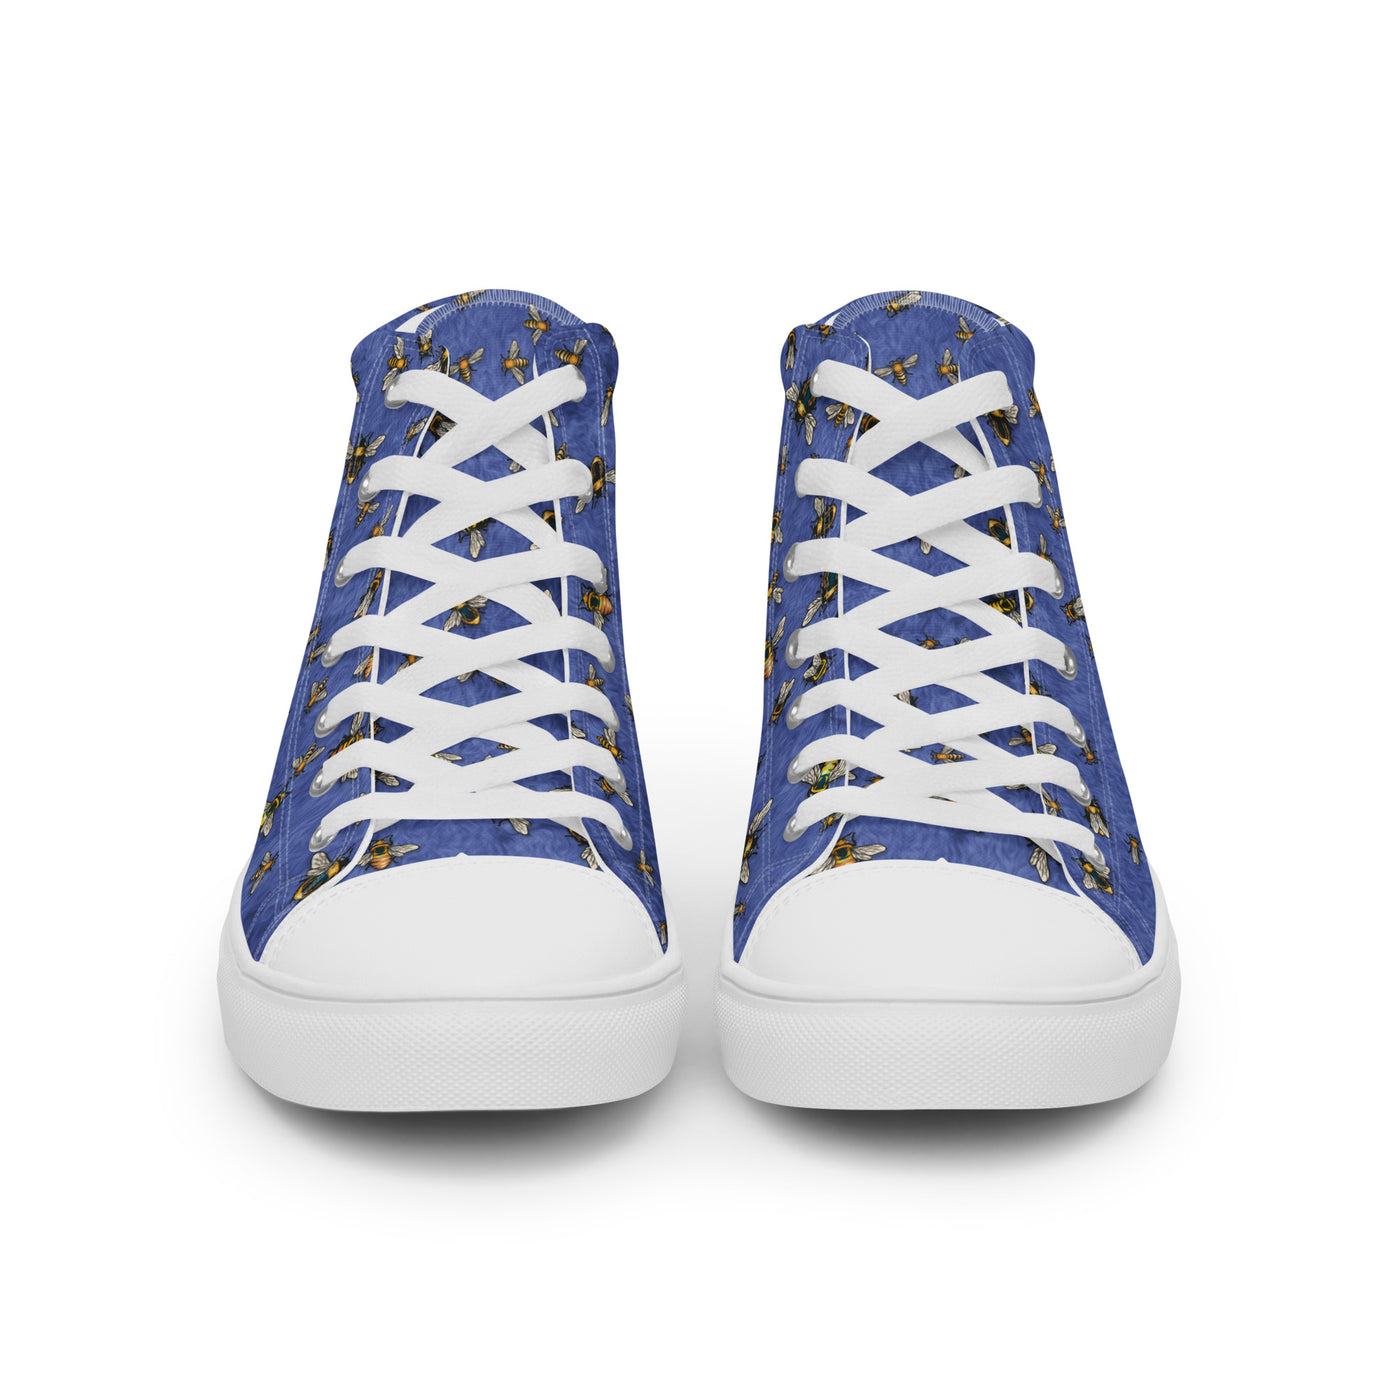 Bees on Blue - Women's High Top Canvas Shoes